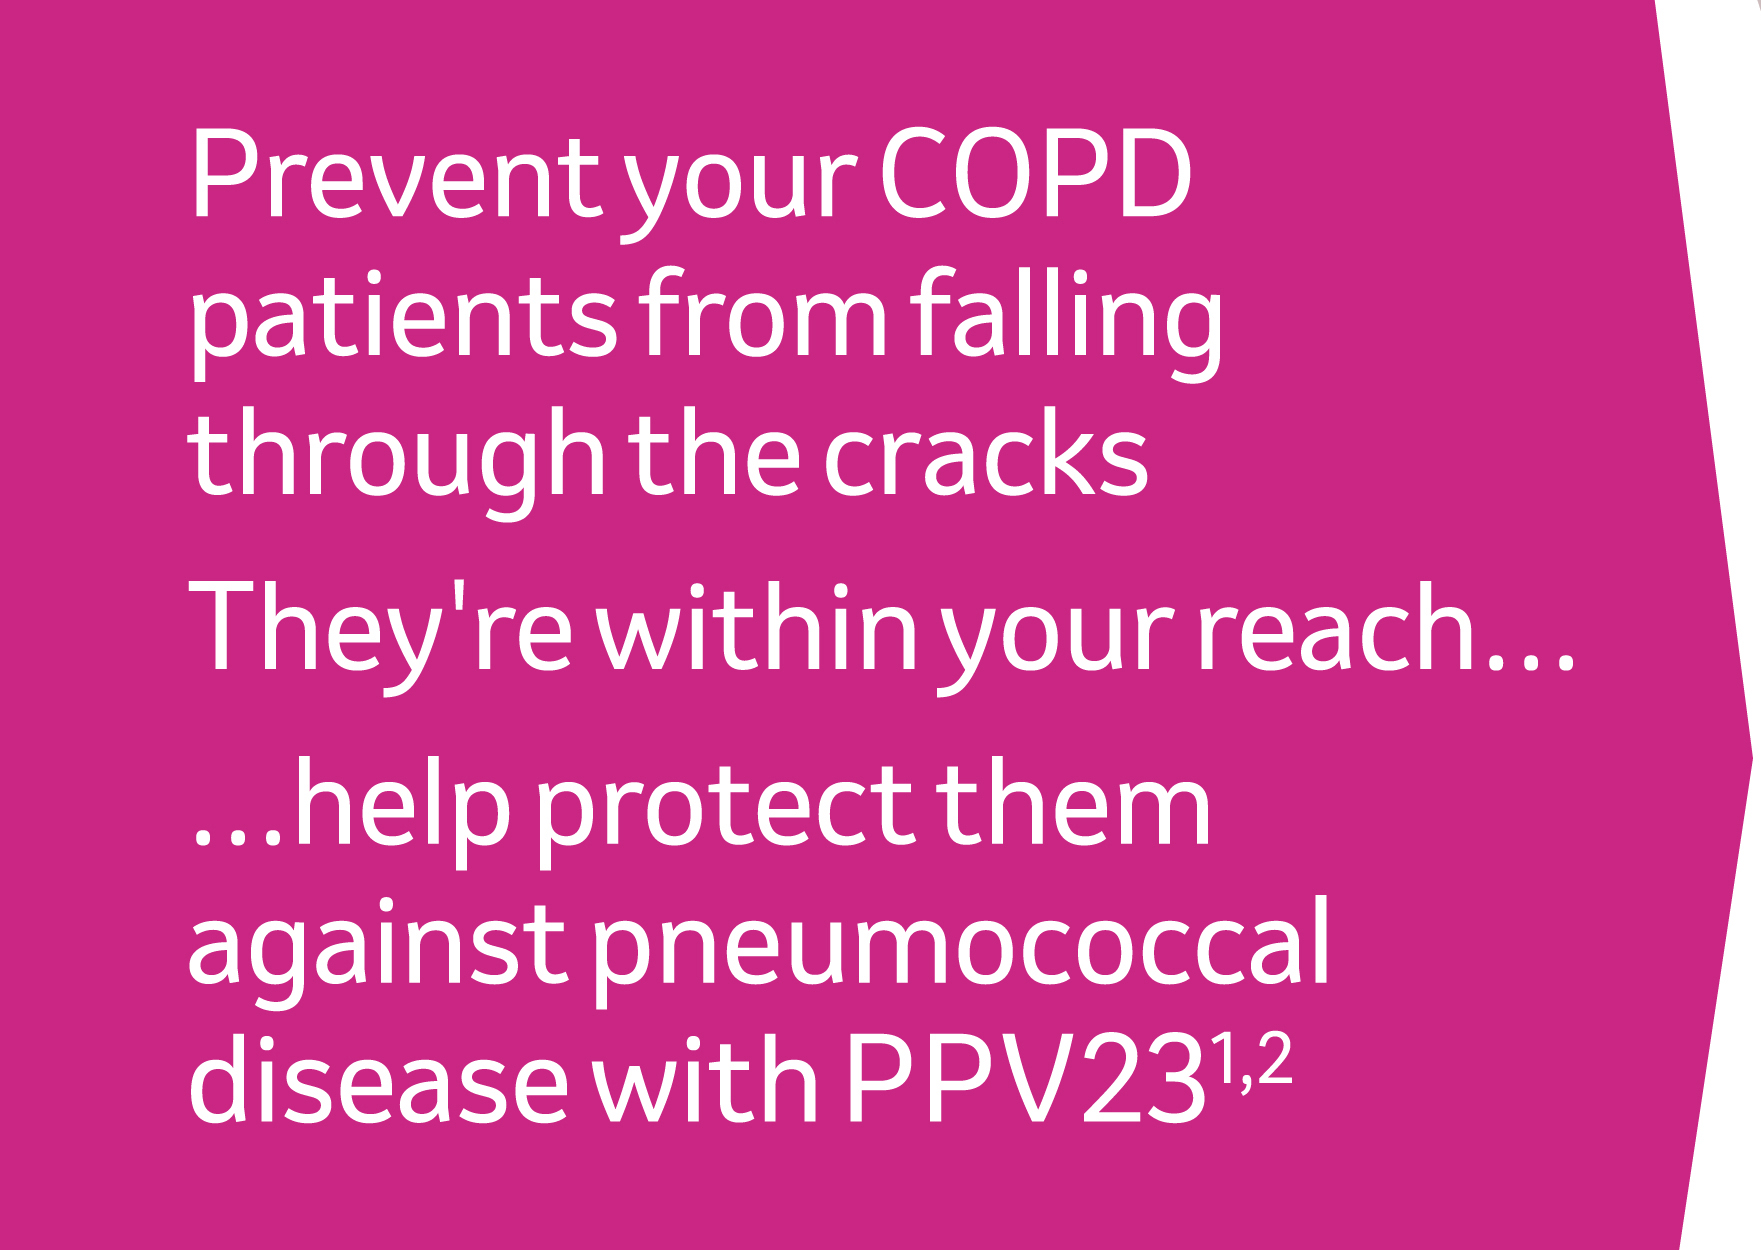 Prevent your COPD patients from falling through the cracks. They're within your reach - help protect them against pneumococcal disease with pPV23 - references 1,2